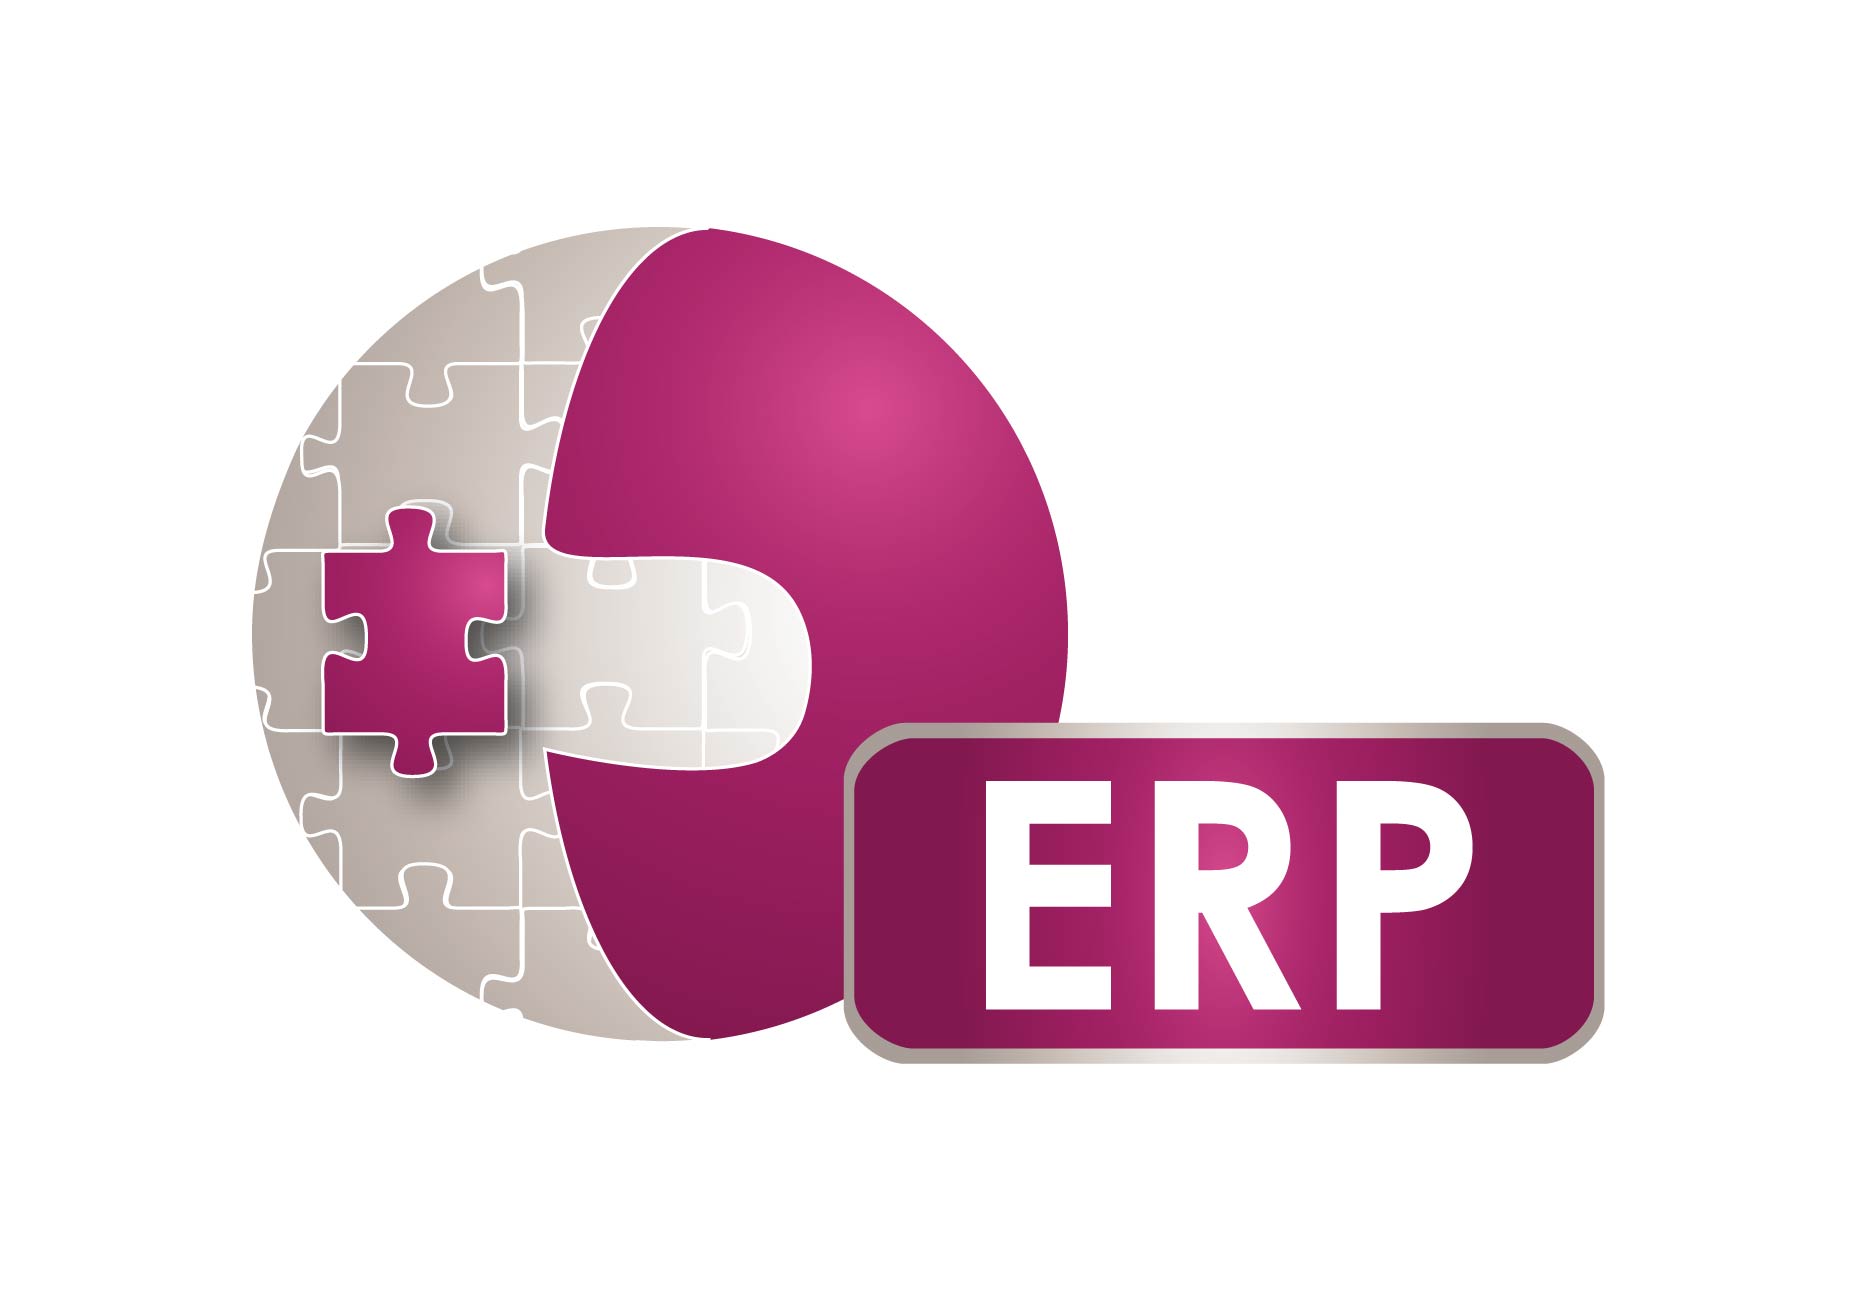 erp providers in india,erode,list,services,custom ...